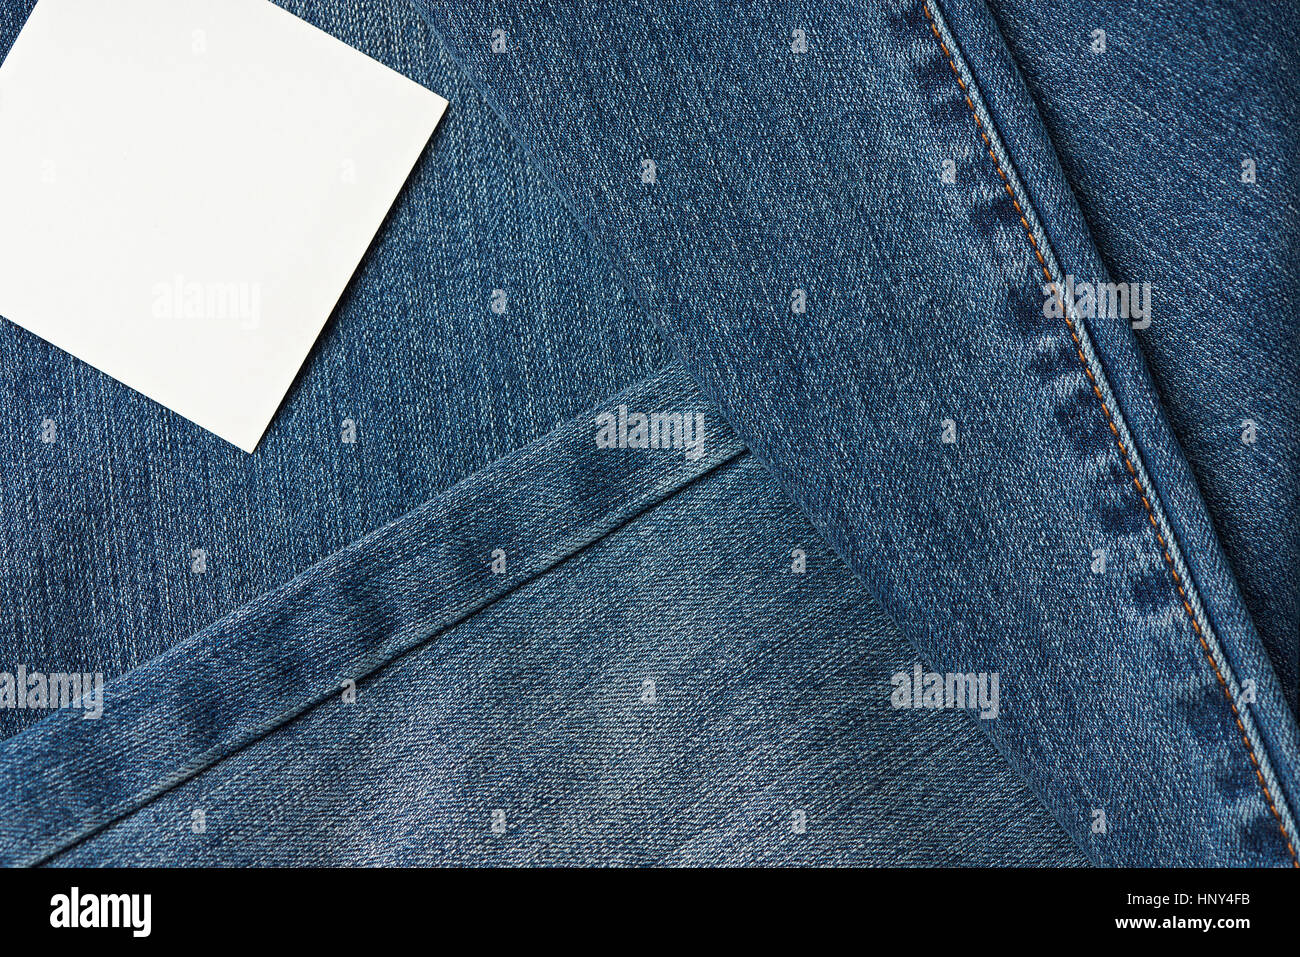 jeans fabric background with texture and stitches, white label tag Stock Photo